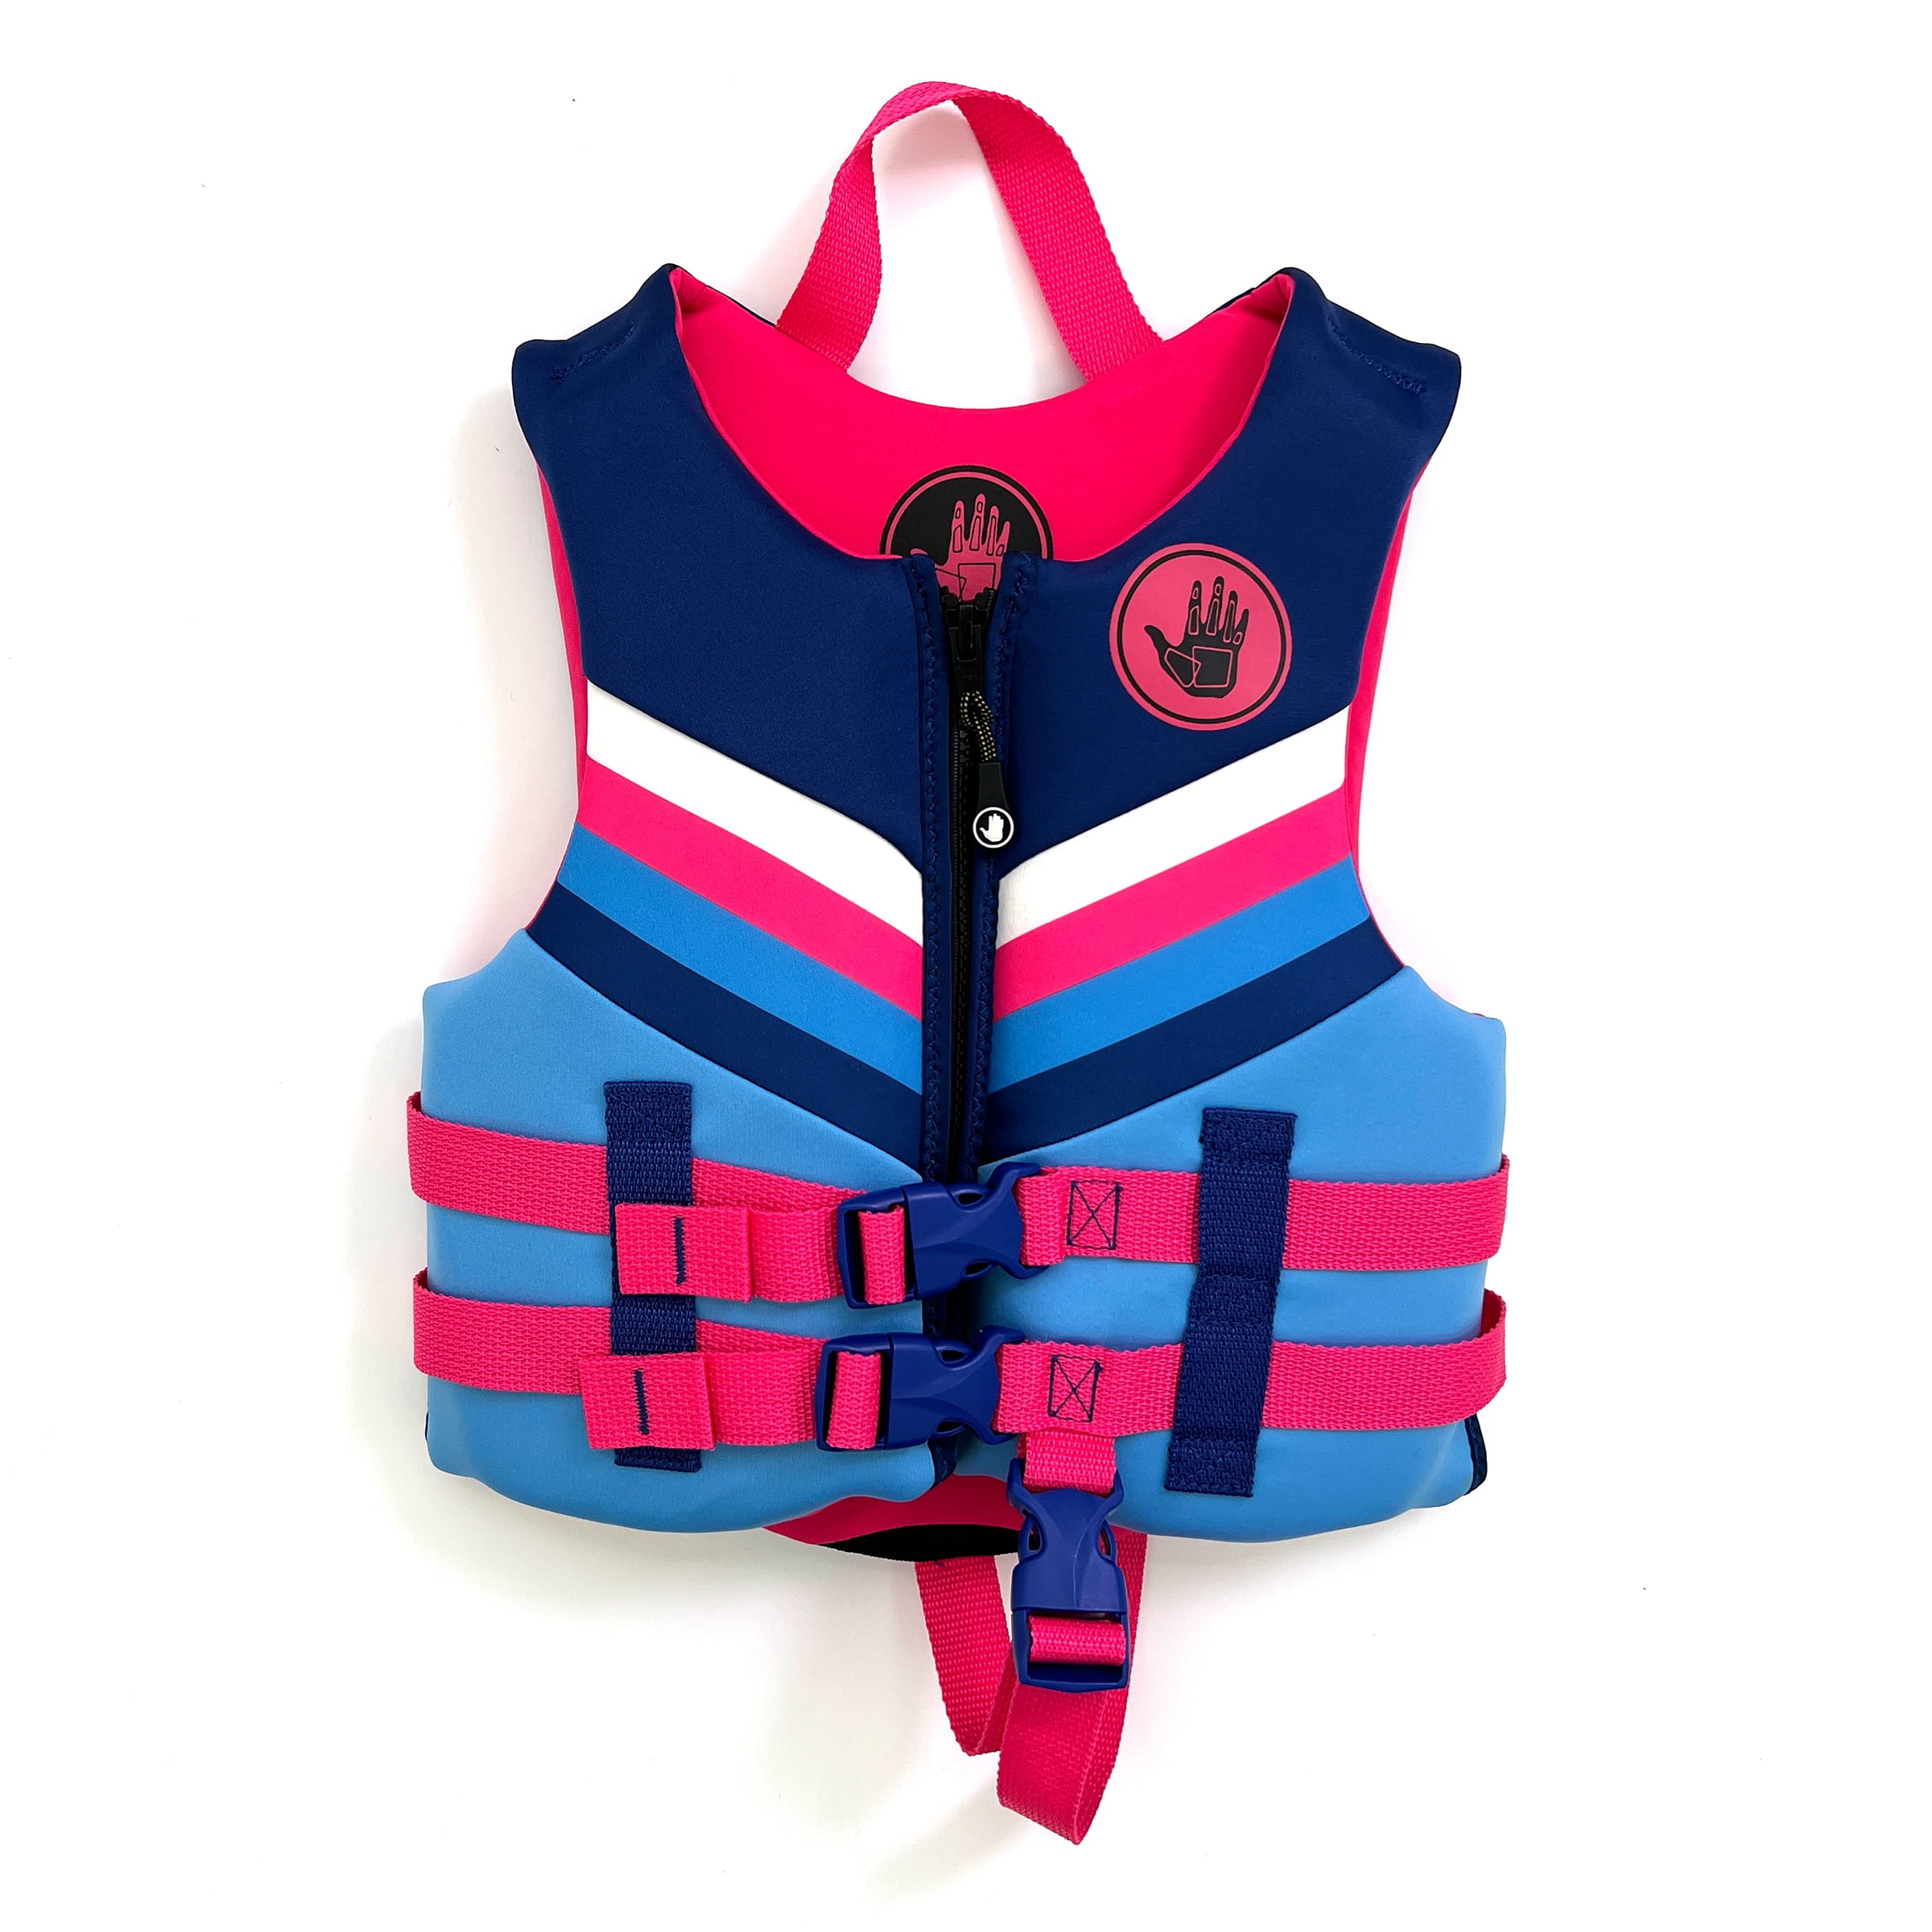 Swimming Cartoon Life Jacket safety Vest for Kids Baby Children Cute Pink US 